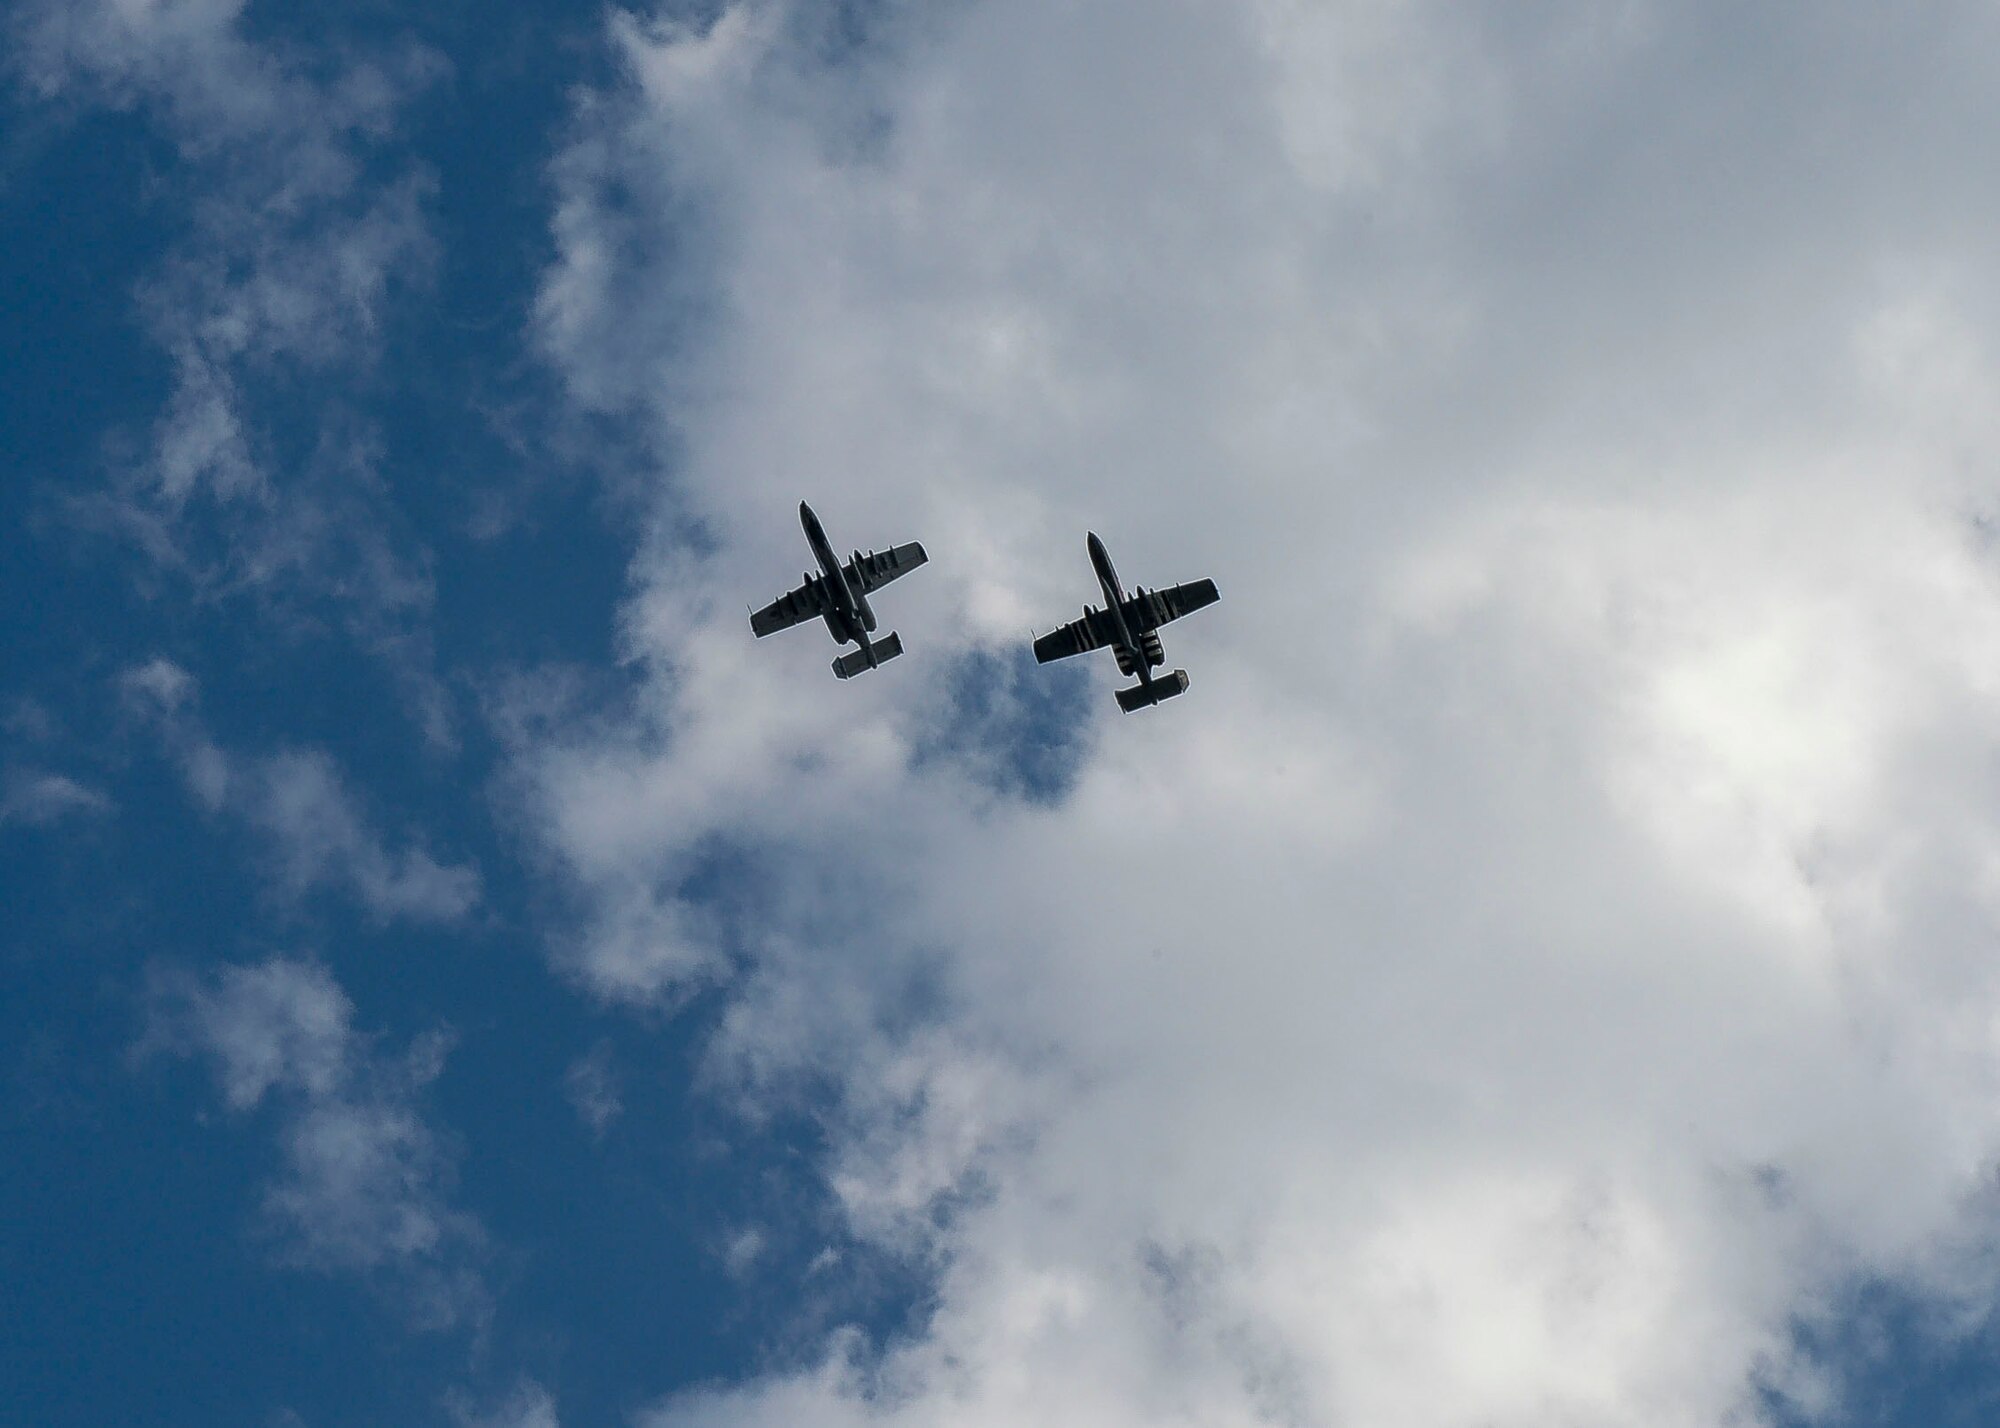 Two A-10 Thunderbolt II aircrafts fly over Lielvarde Air Base, Latvia, June 4, 2018. A-10s were deployed to Europe from the 127th Wing at Selfridge Air National Guard Base, Michigan, to support exercise Saber Strike 18. While flying, A-10 pilots worked on close air support tactics and communication with Joint Terminal Attack Controllers to combine air and land capabilities for U.S. and partnered nations. (U.S. Air Force photo by Staff Sgt. Jimmie D. Pike)